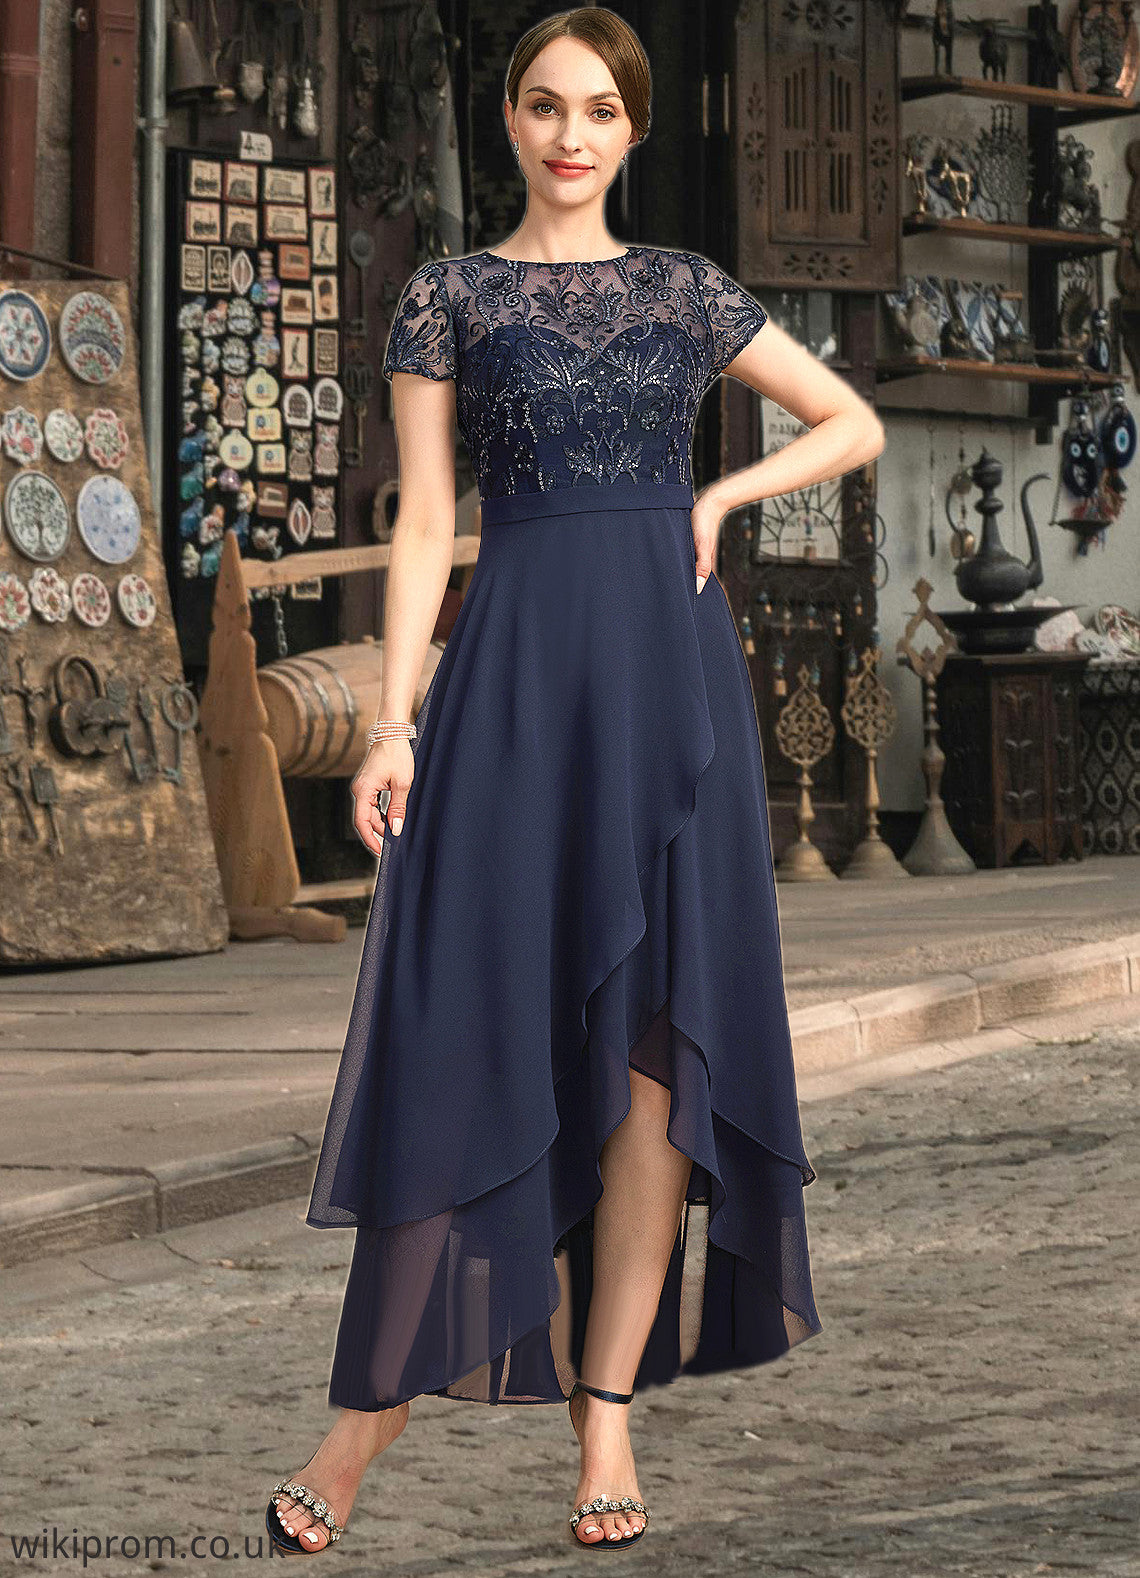 Adelaide A-line Scoop Illusion Asymmetrical Chiffon Lace Mother of the Bride Dress With Sequins SWK126P0021902